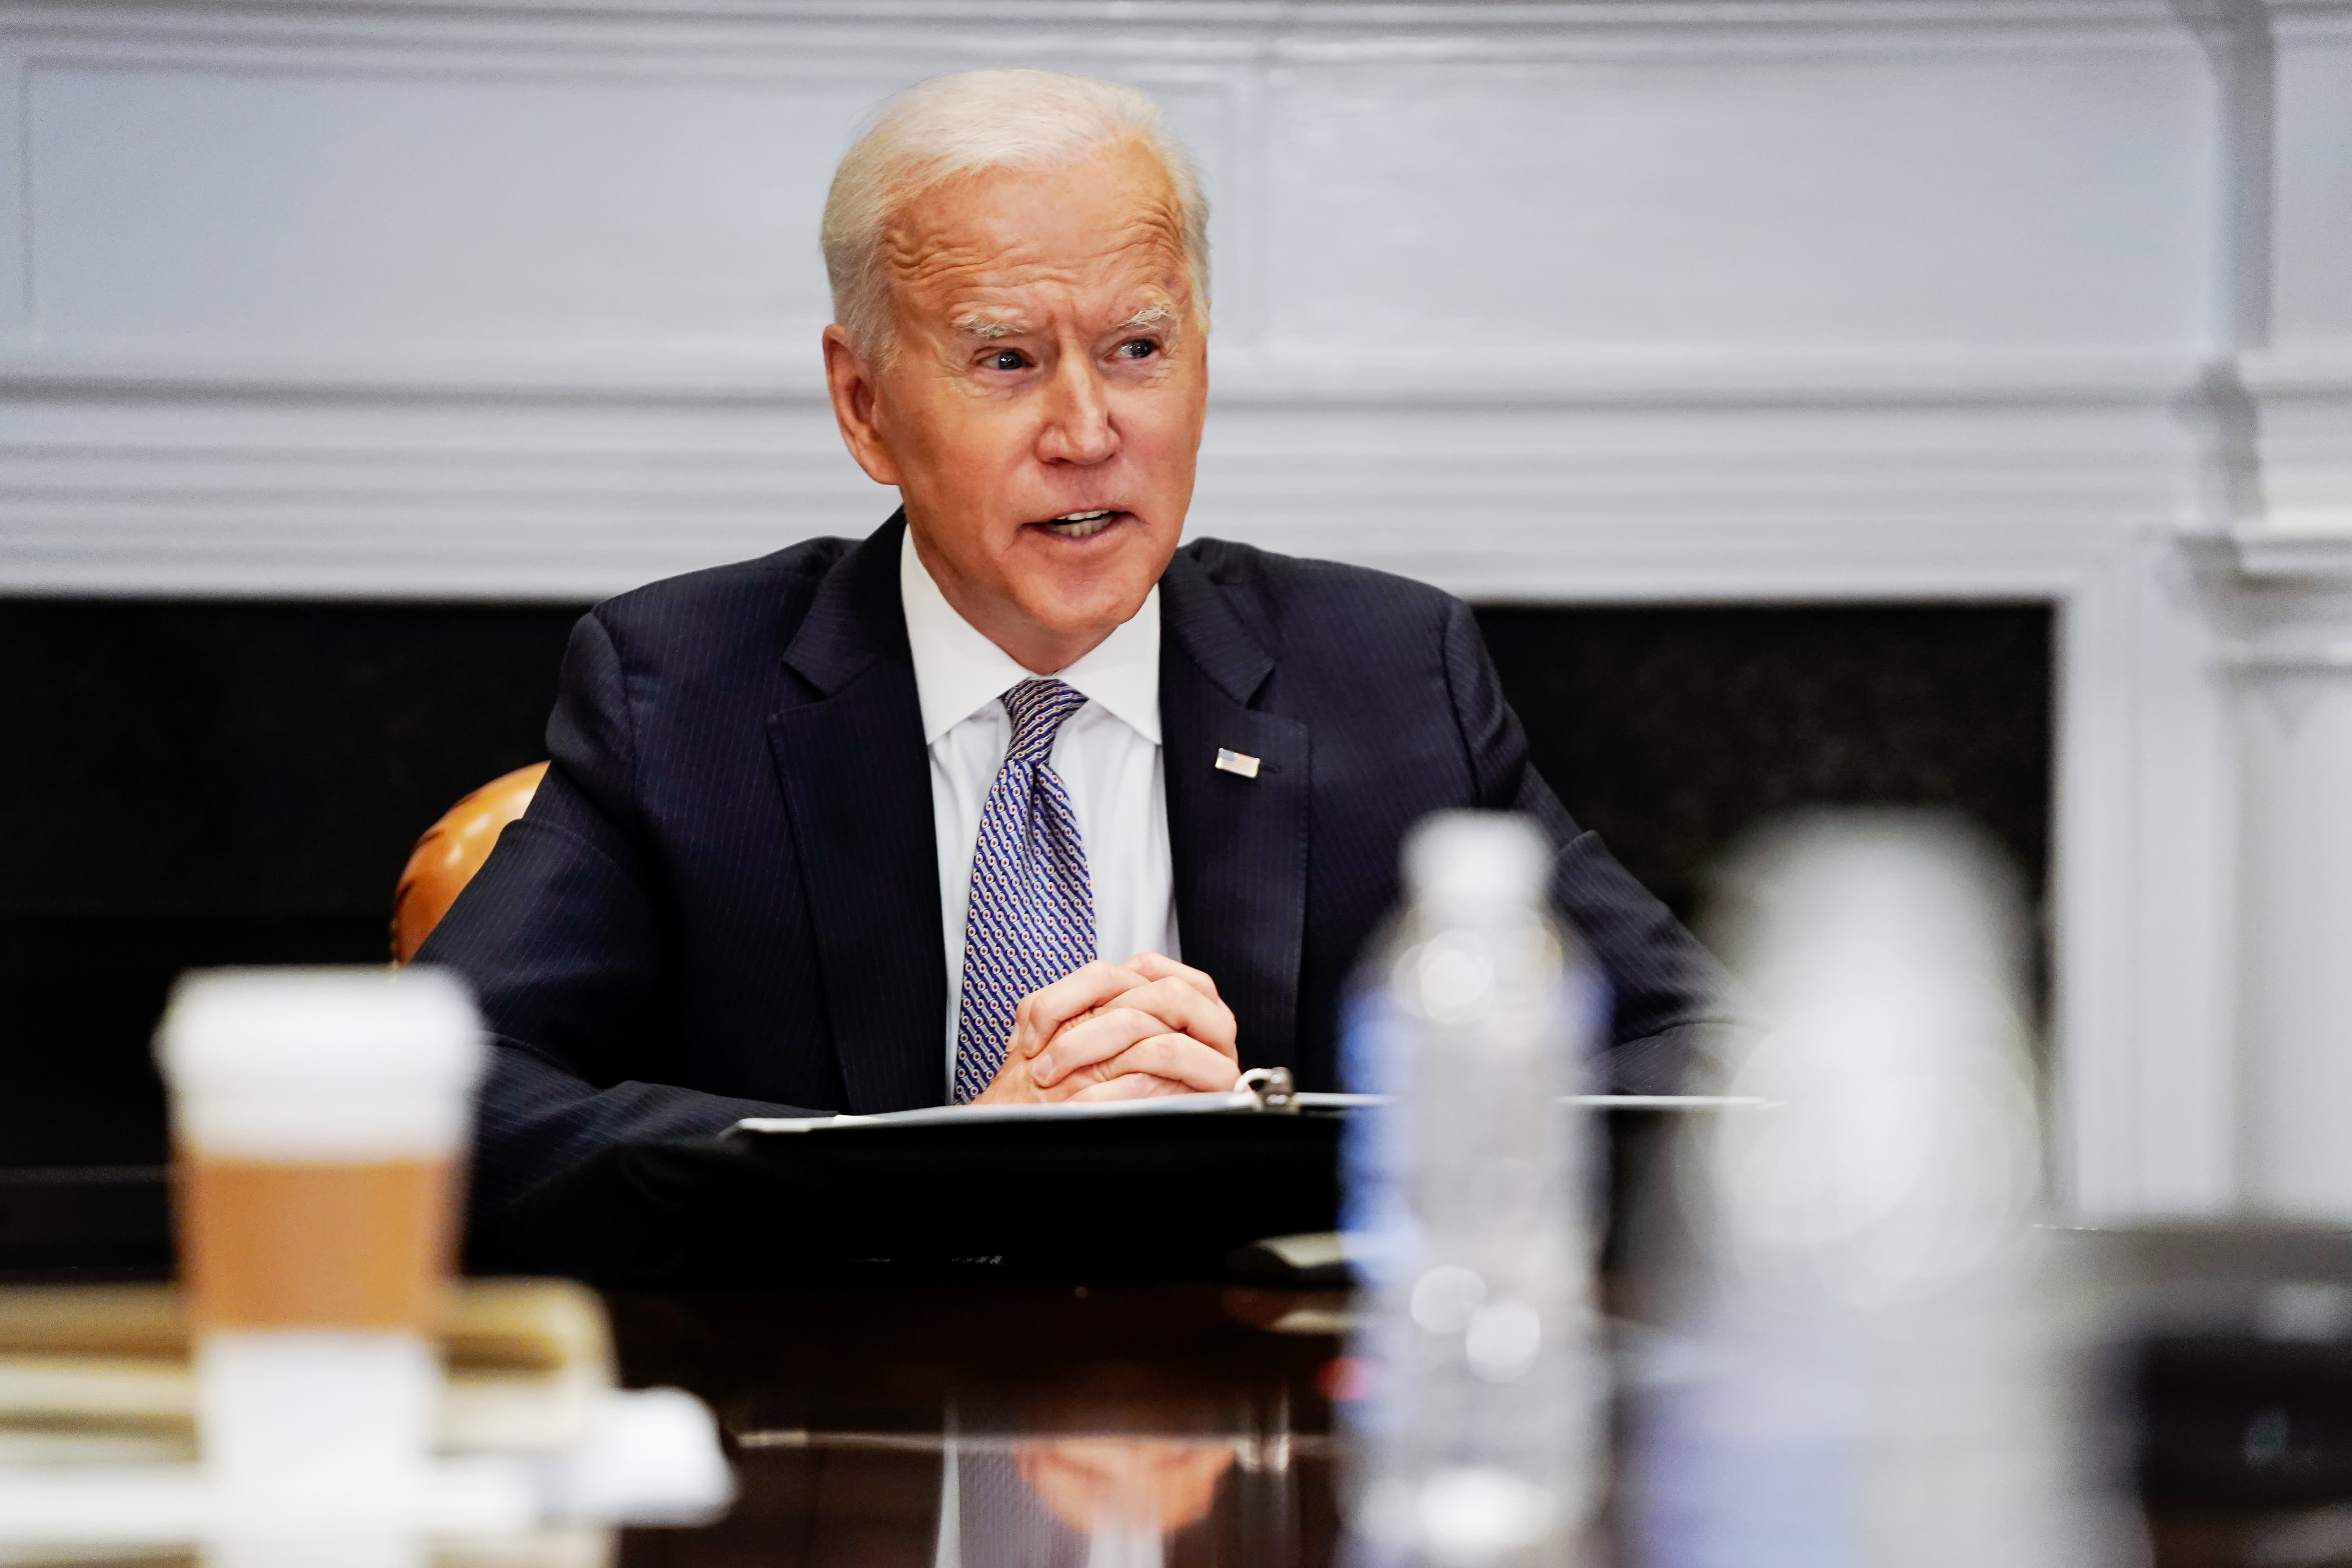 Managers call on Biden to reduce emissions to combat climate change